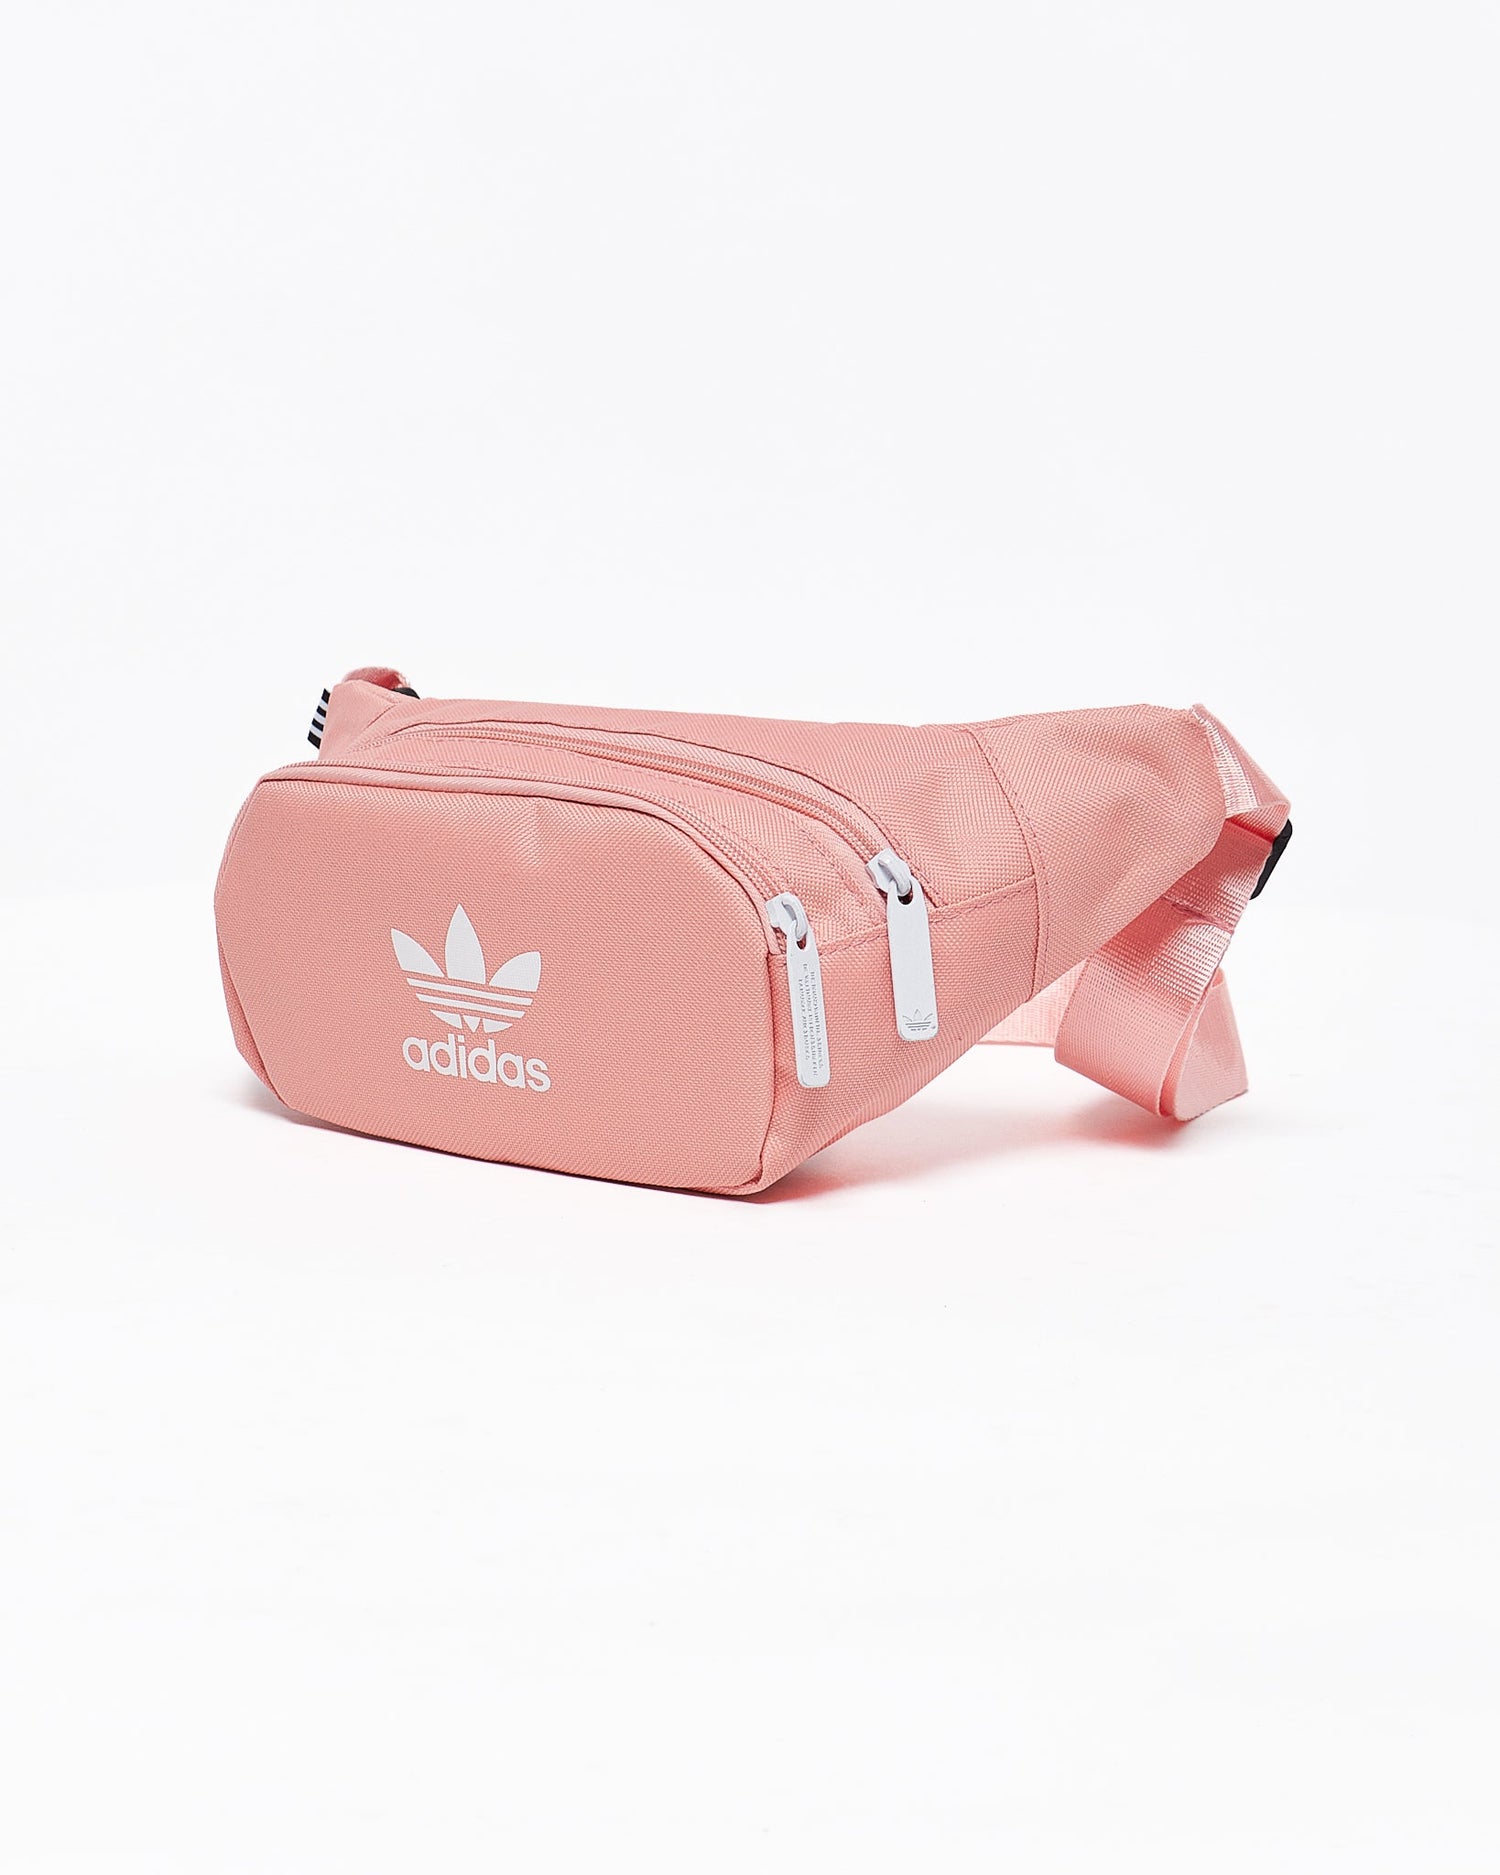 MOI OUTFIT-AD Logo Printed Unisex Bumbag 14.90